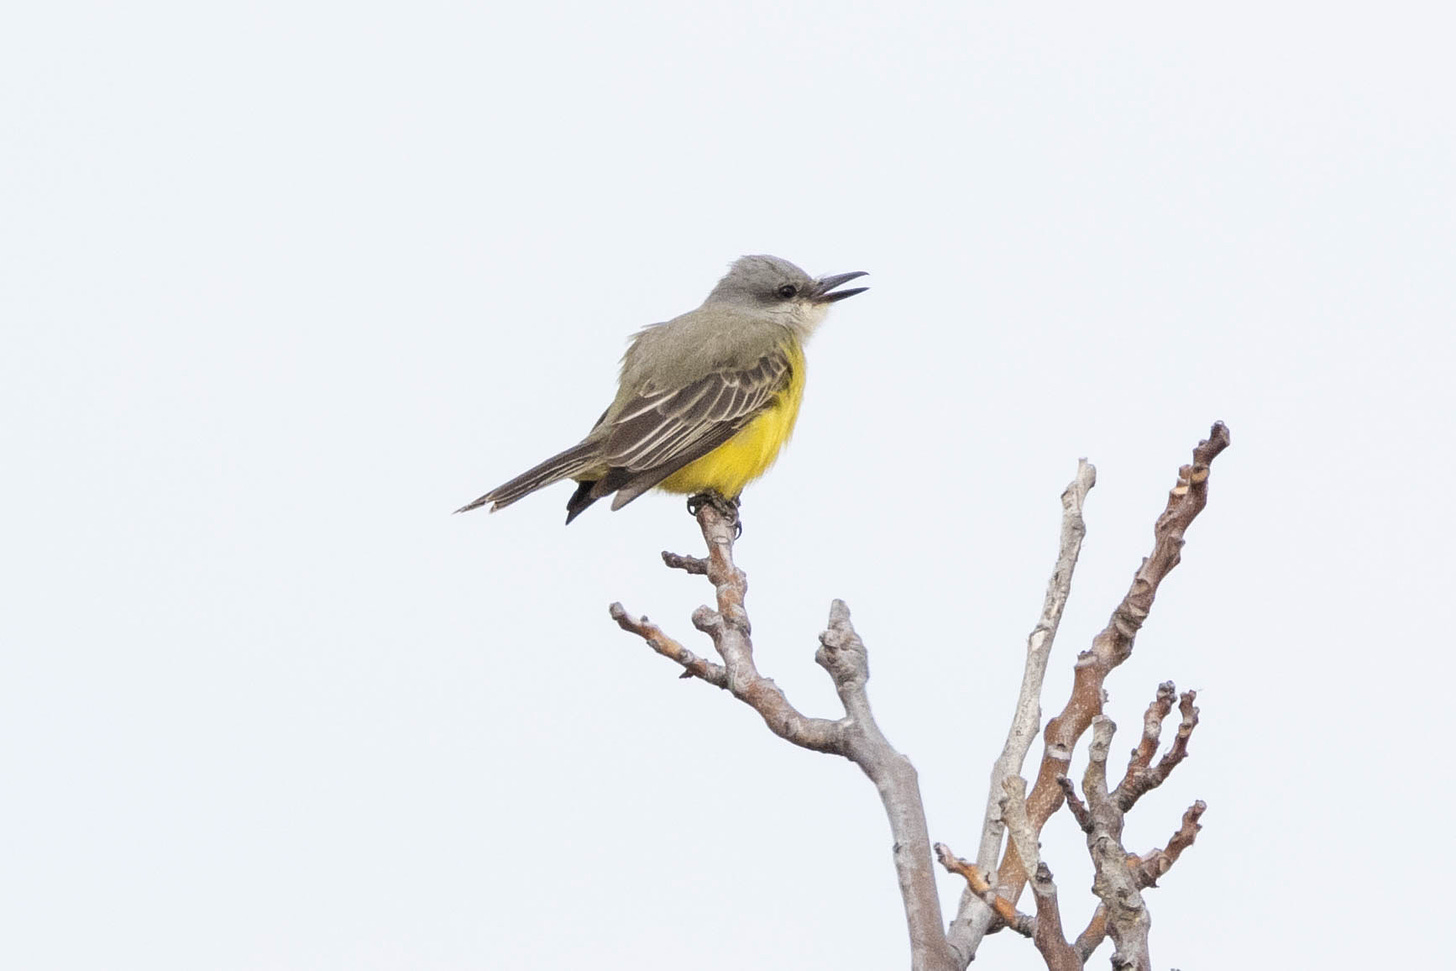 a gray bird with darker gray wings, a yellow-gray back, a bright yellow belly, darker area around its eye, and long/thick black beak held open. it is sitting on very top left of an approximately v-shaped leafless branch, facing right against a white sky